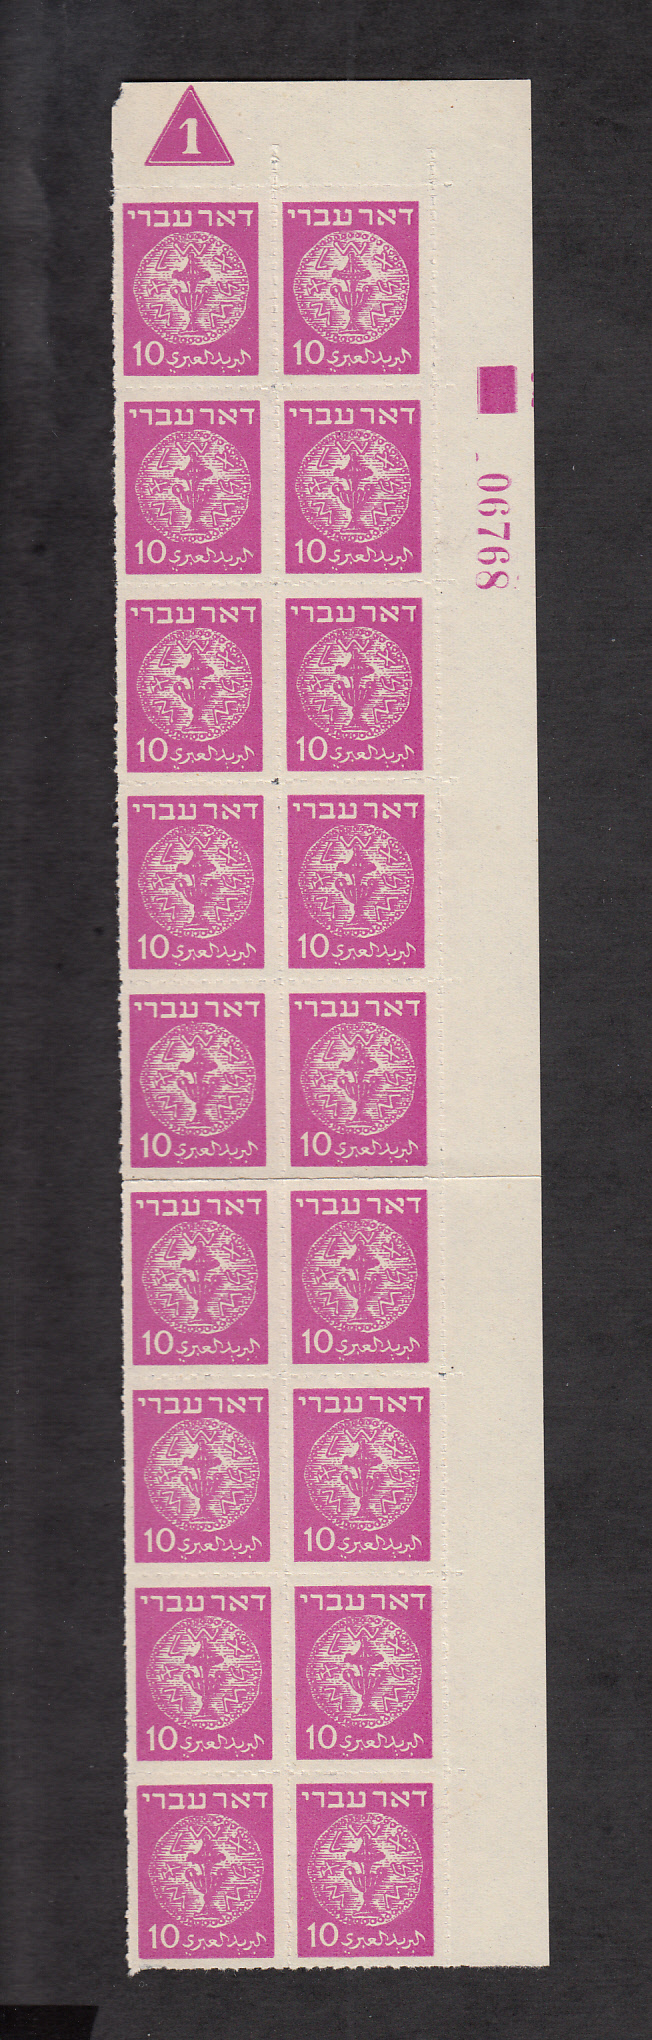 Lot 171 - Israel 1948 Stamps & Covers - Doar Ivri, First Postage Dues & Holiday issues  -  Doron Waide Mail Auction #39